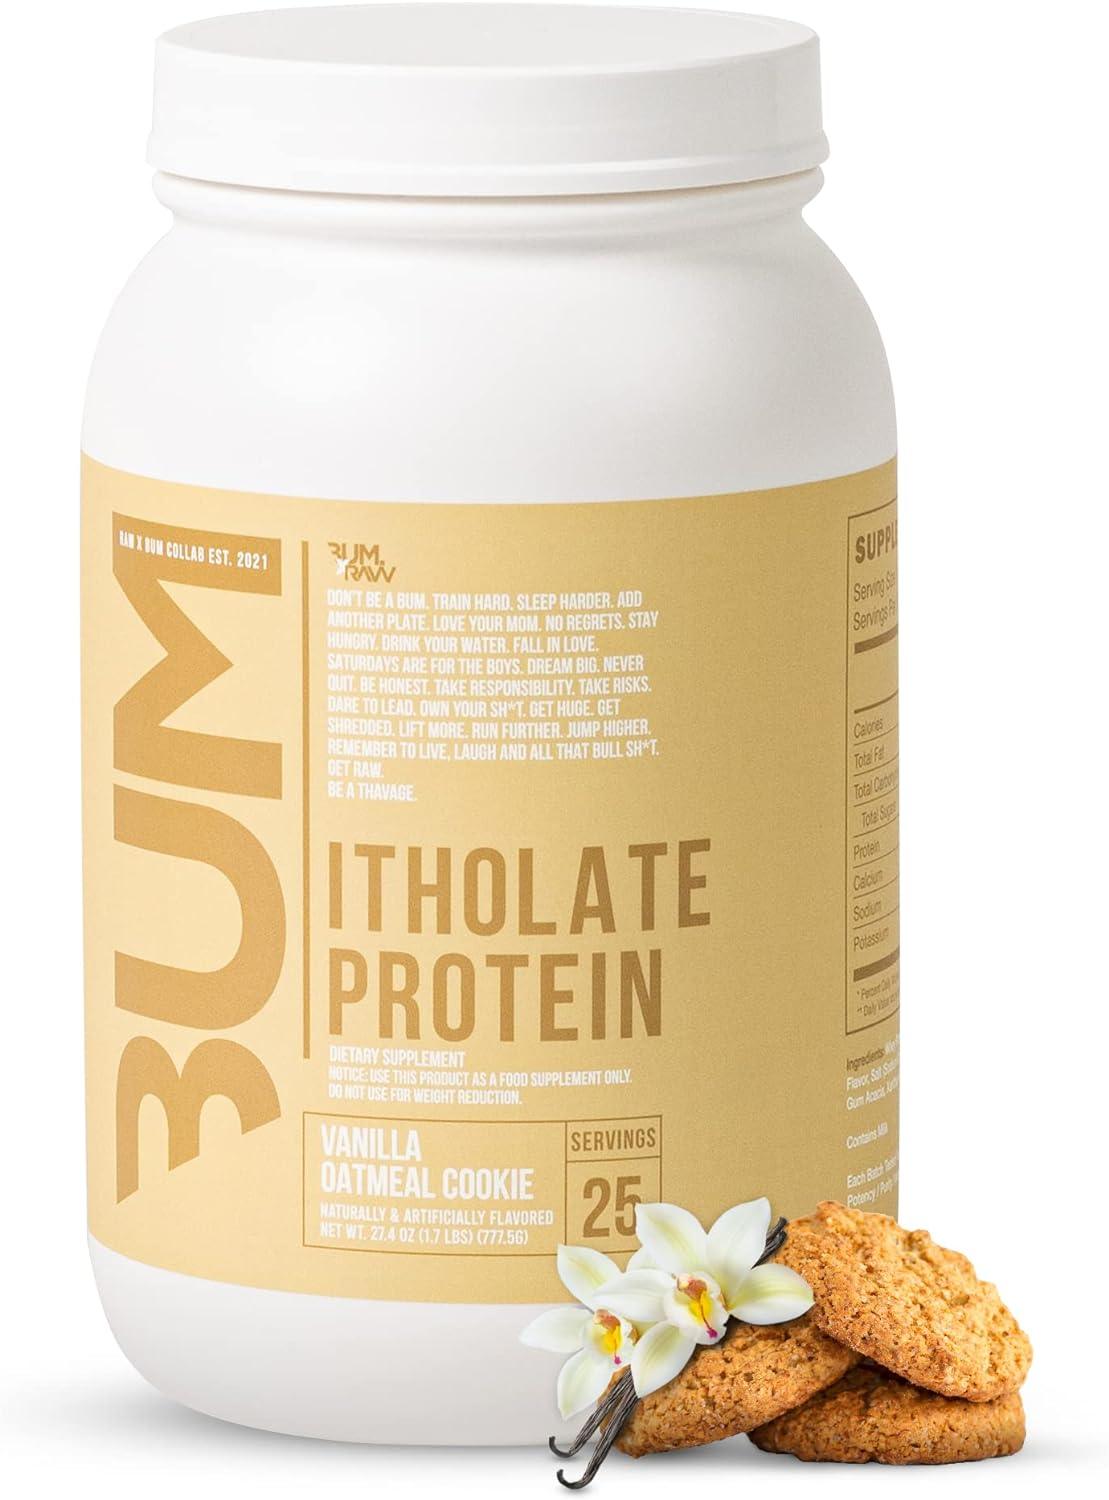 Itholate Protein - Raw Supplements Cbum Series